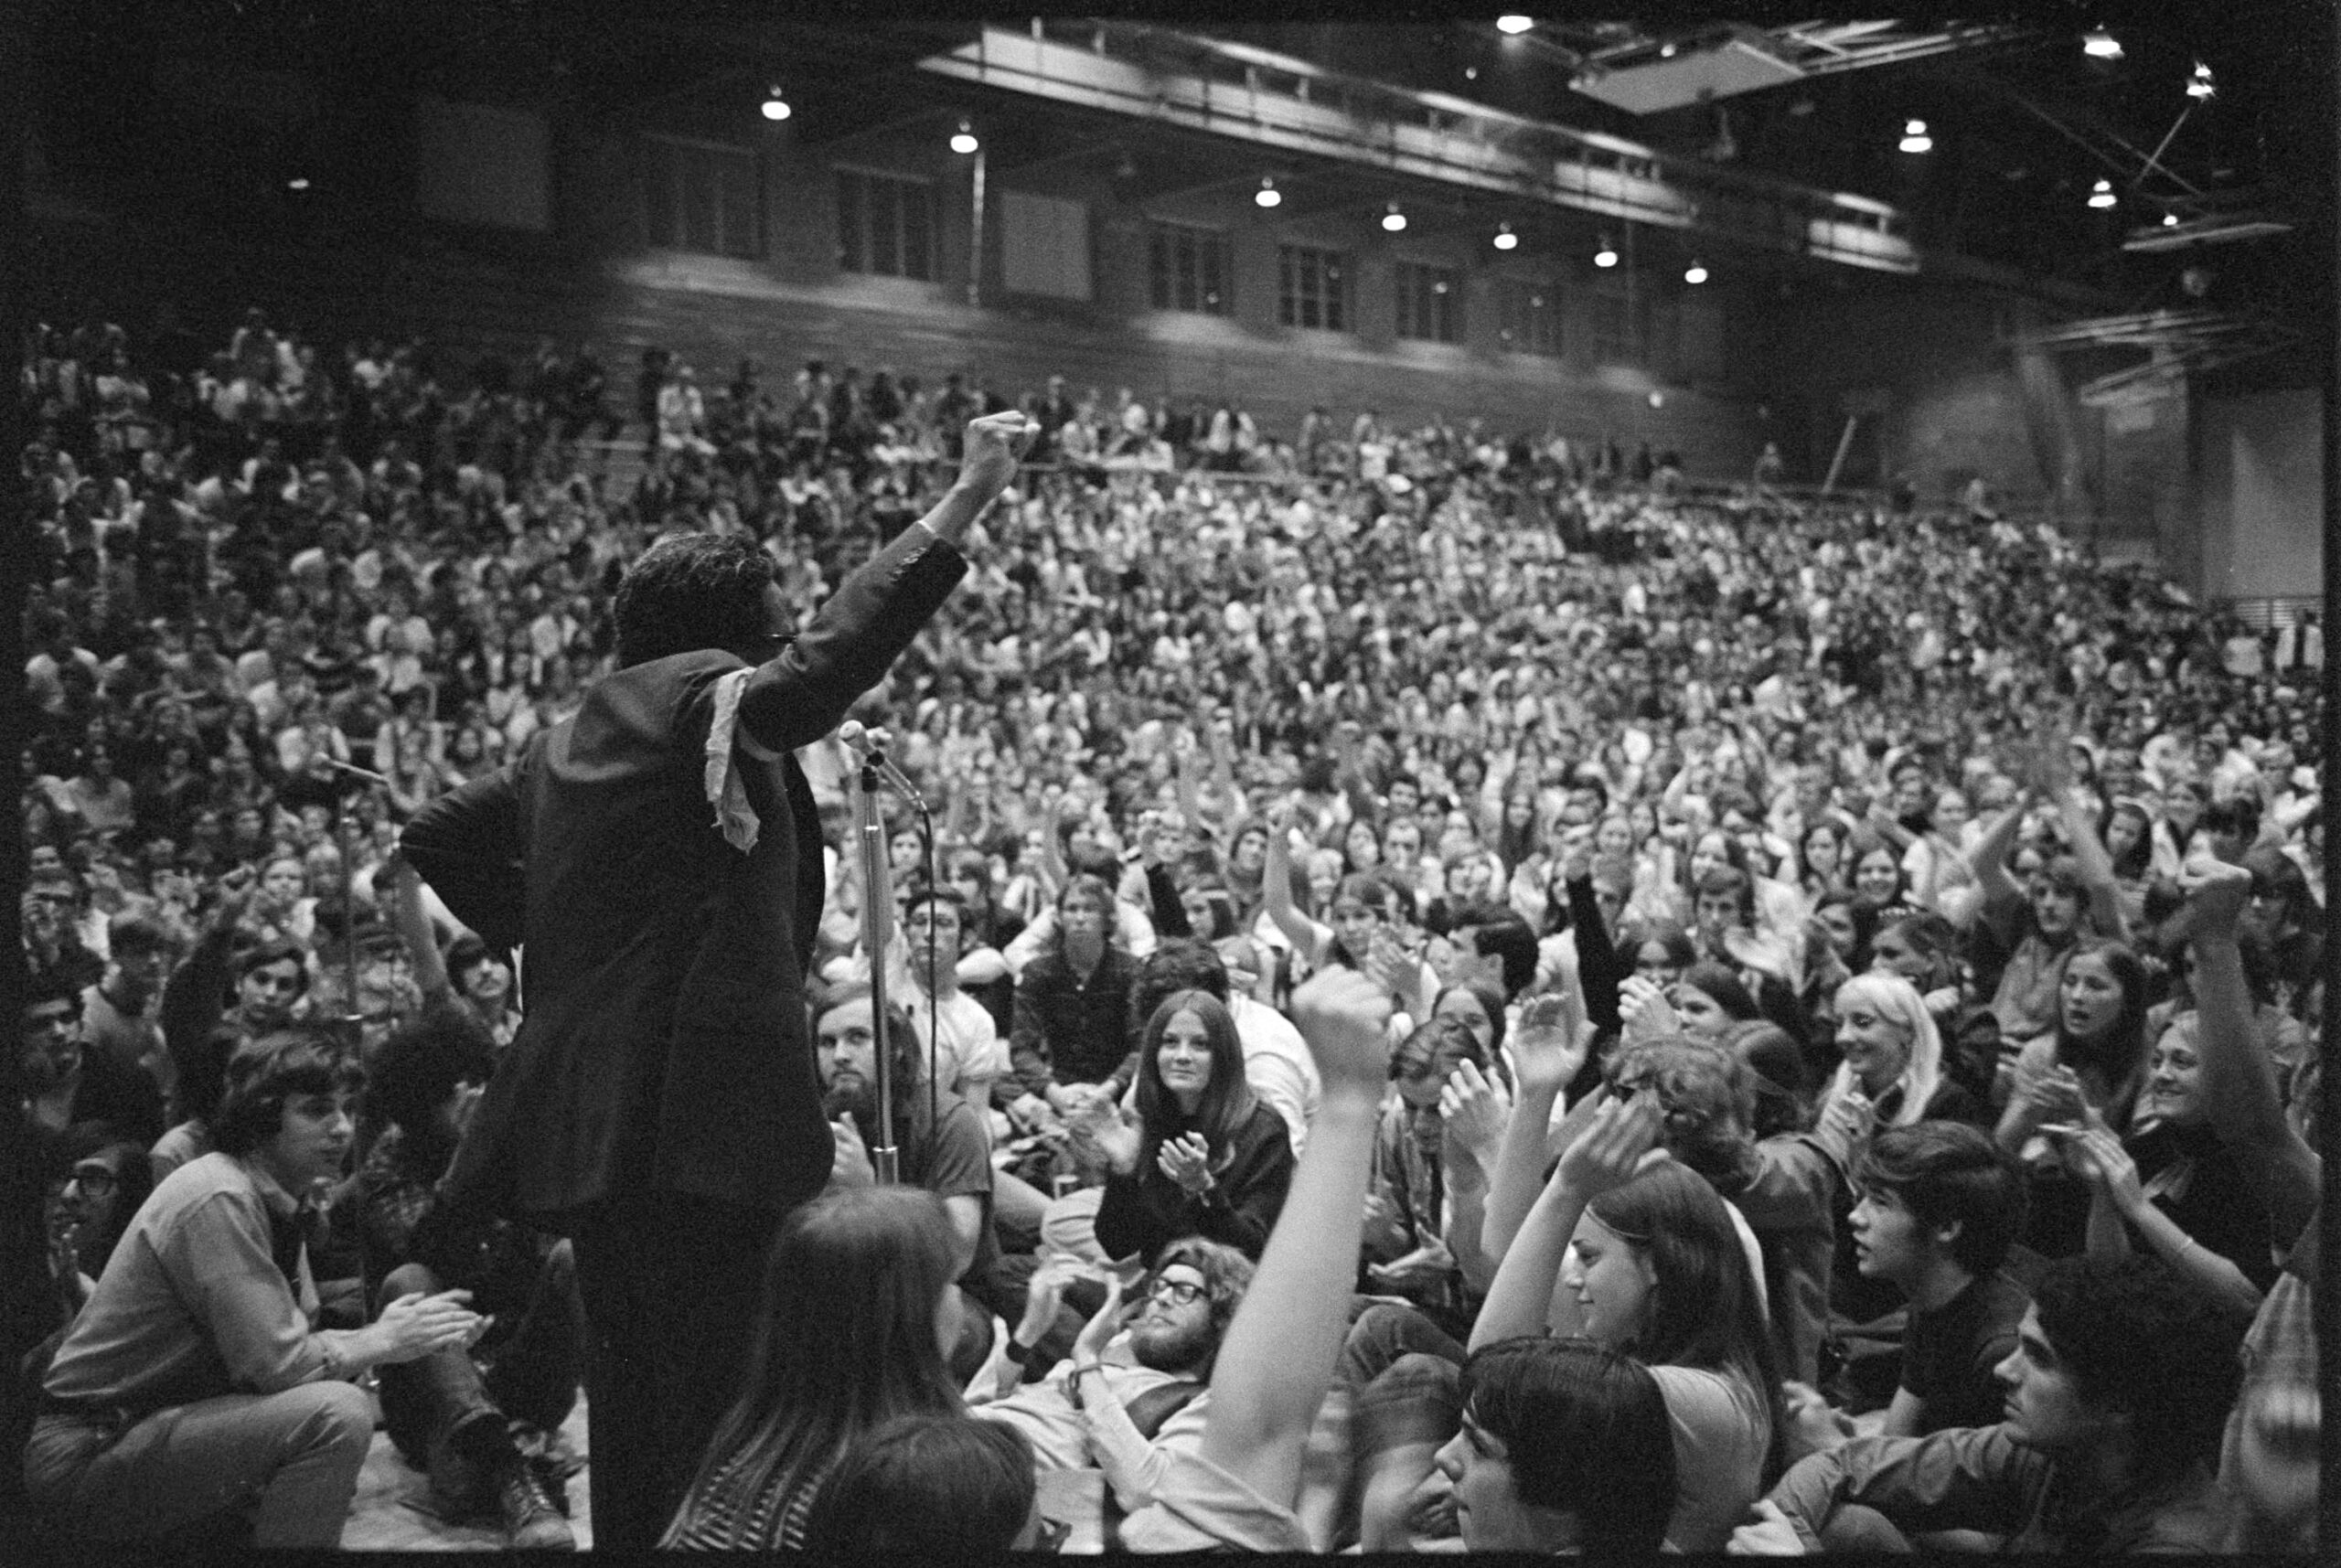 Photographer Gordon Parks raises his fist while speaking at a student rally